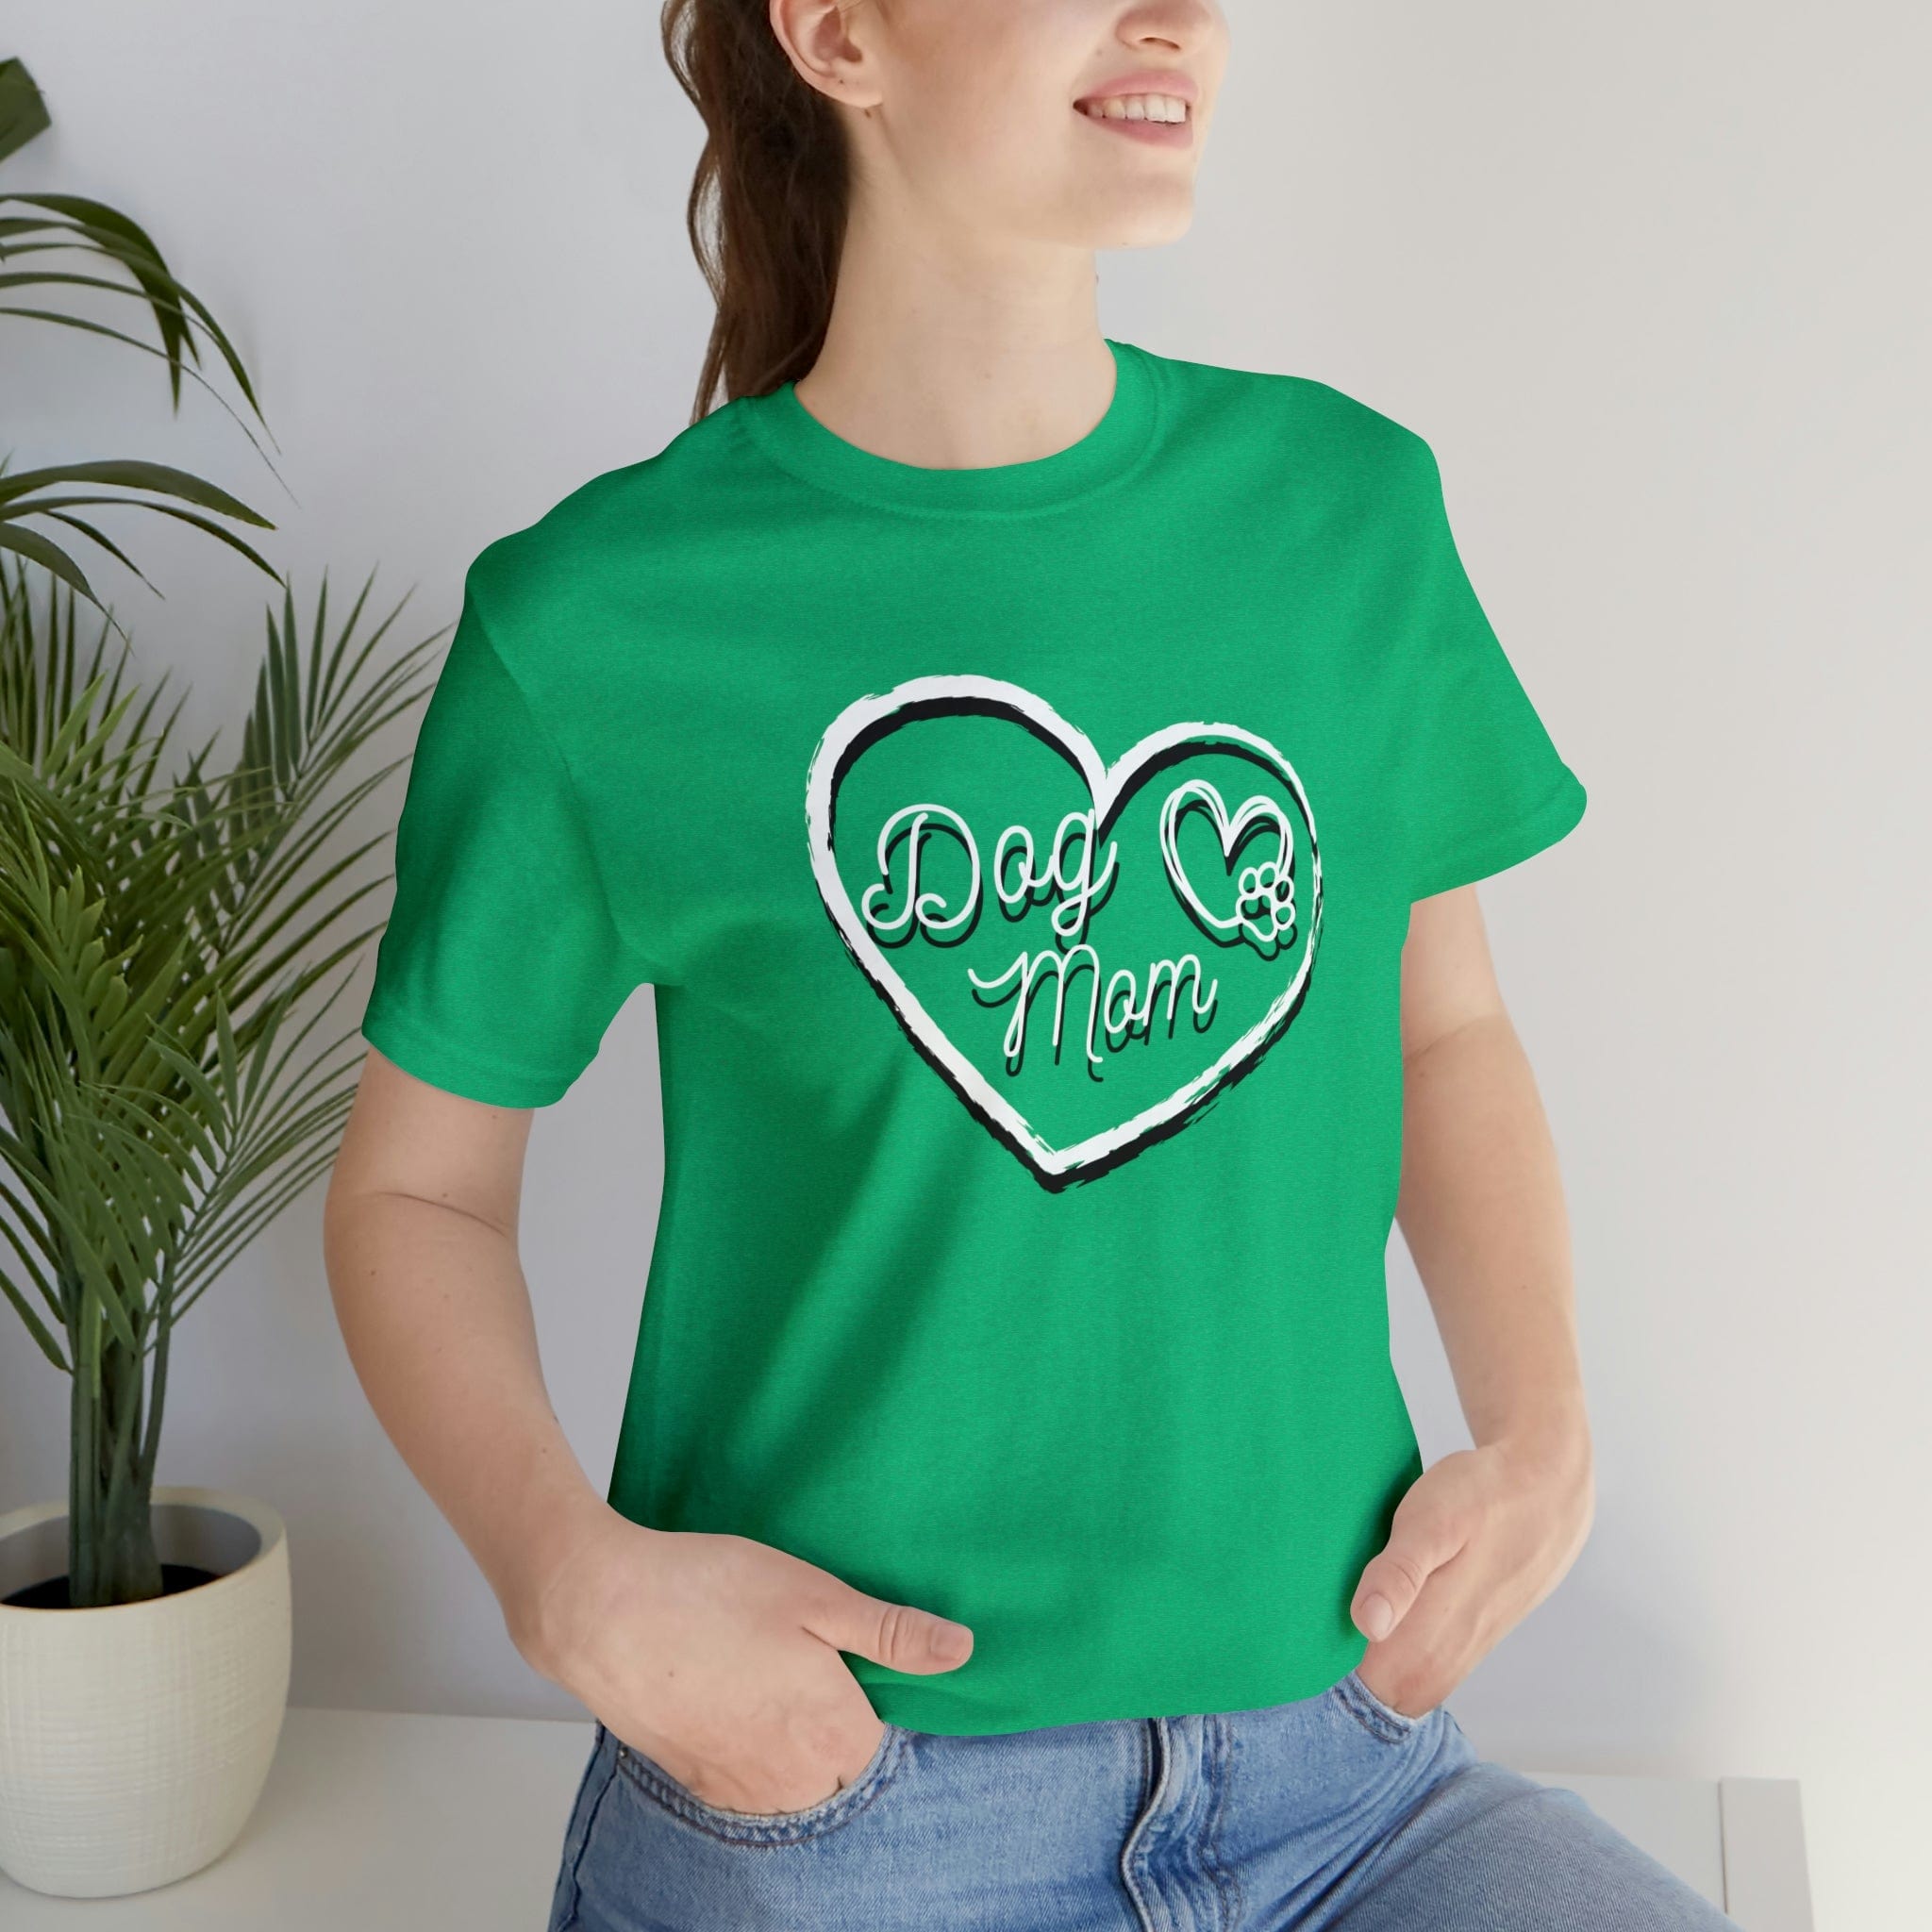 Dog Mom - Unisex Jersey Short Sleeve Tee - Spruced Roost